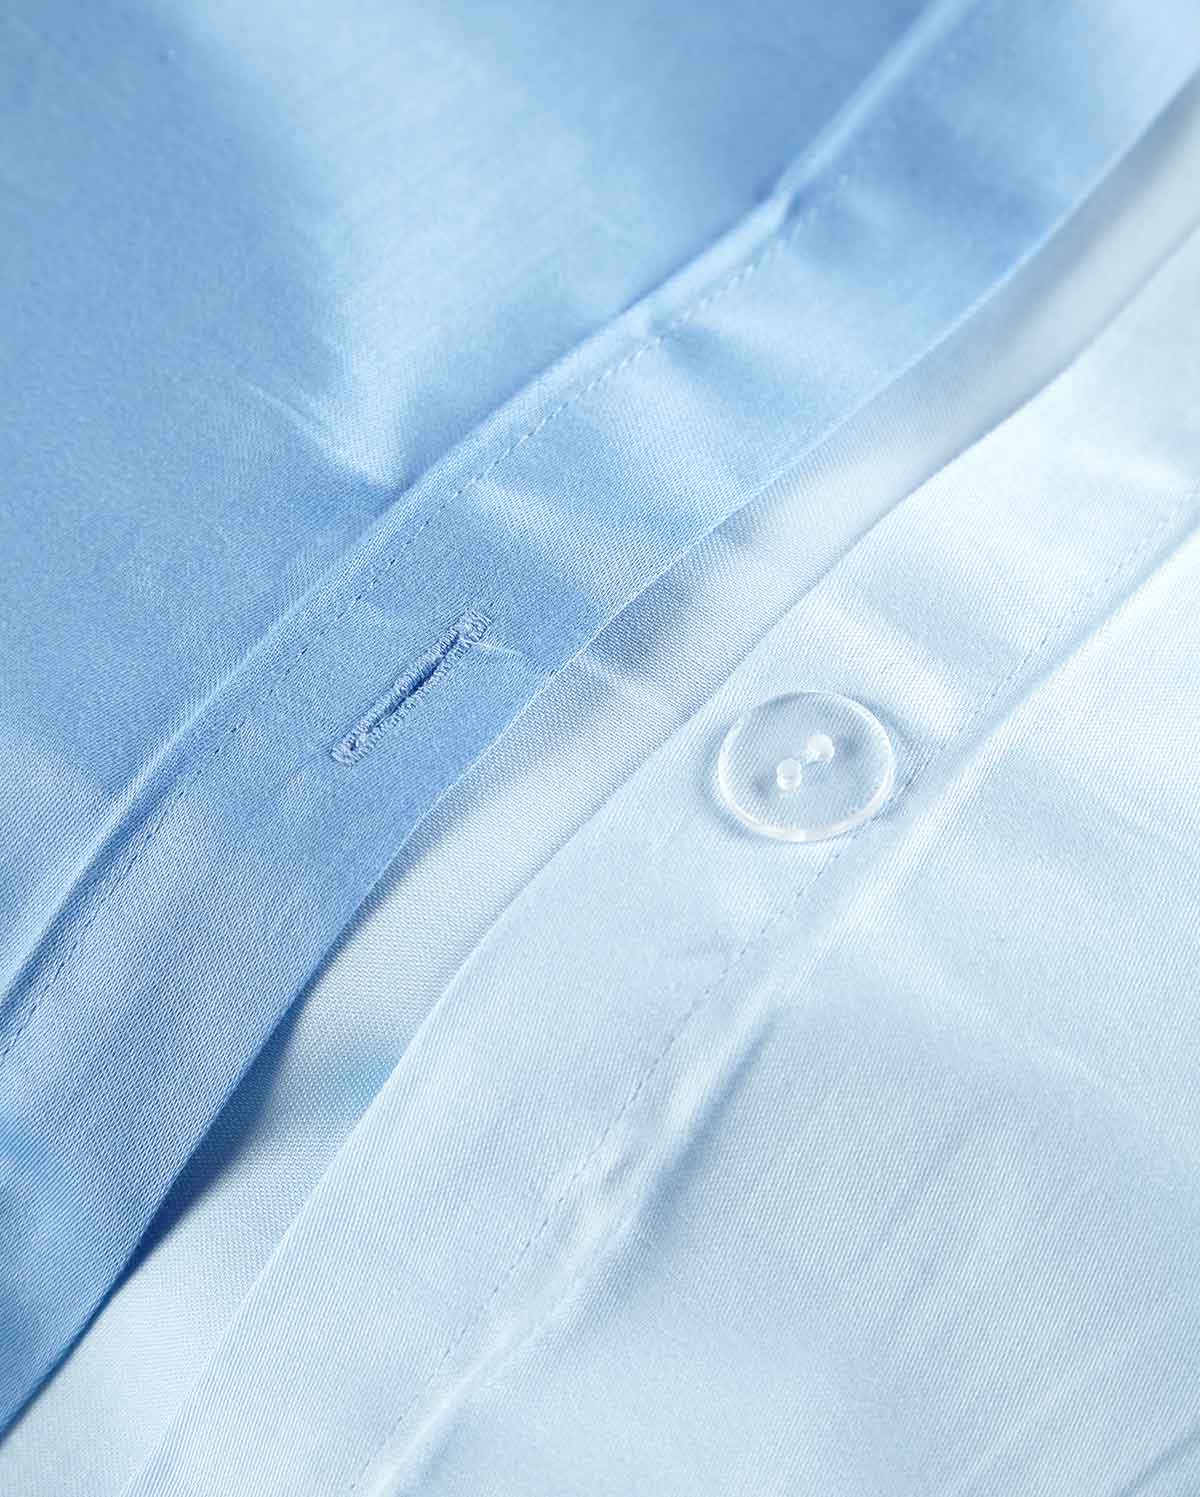 Reversible Percale Bedding Set - Blue & Baby Blue